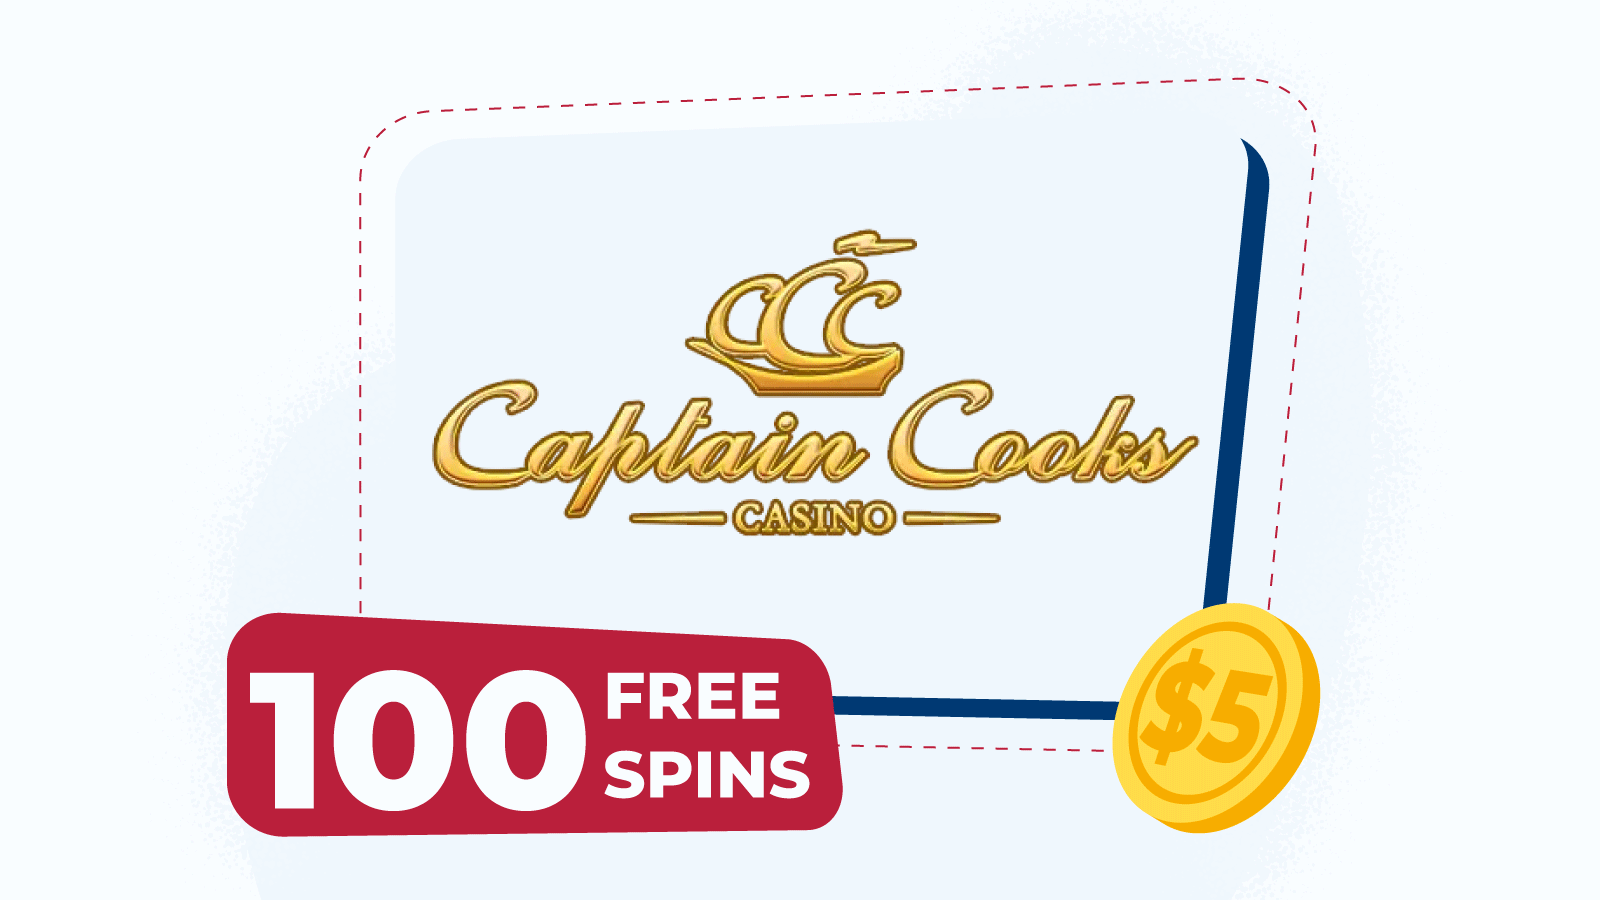 100 spins for R$5 at Captain Cooks Casino